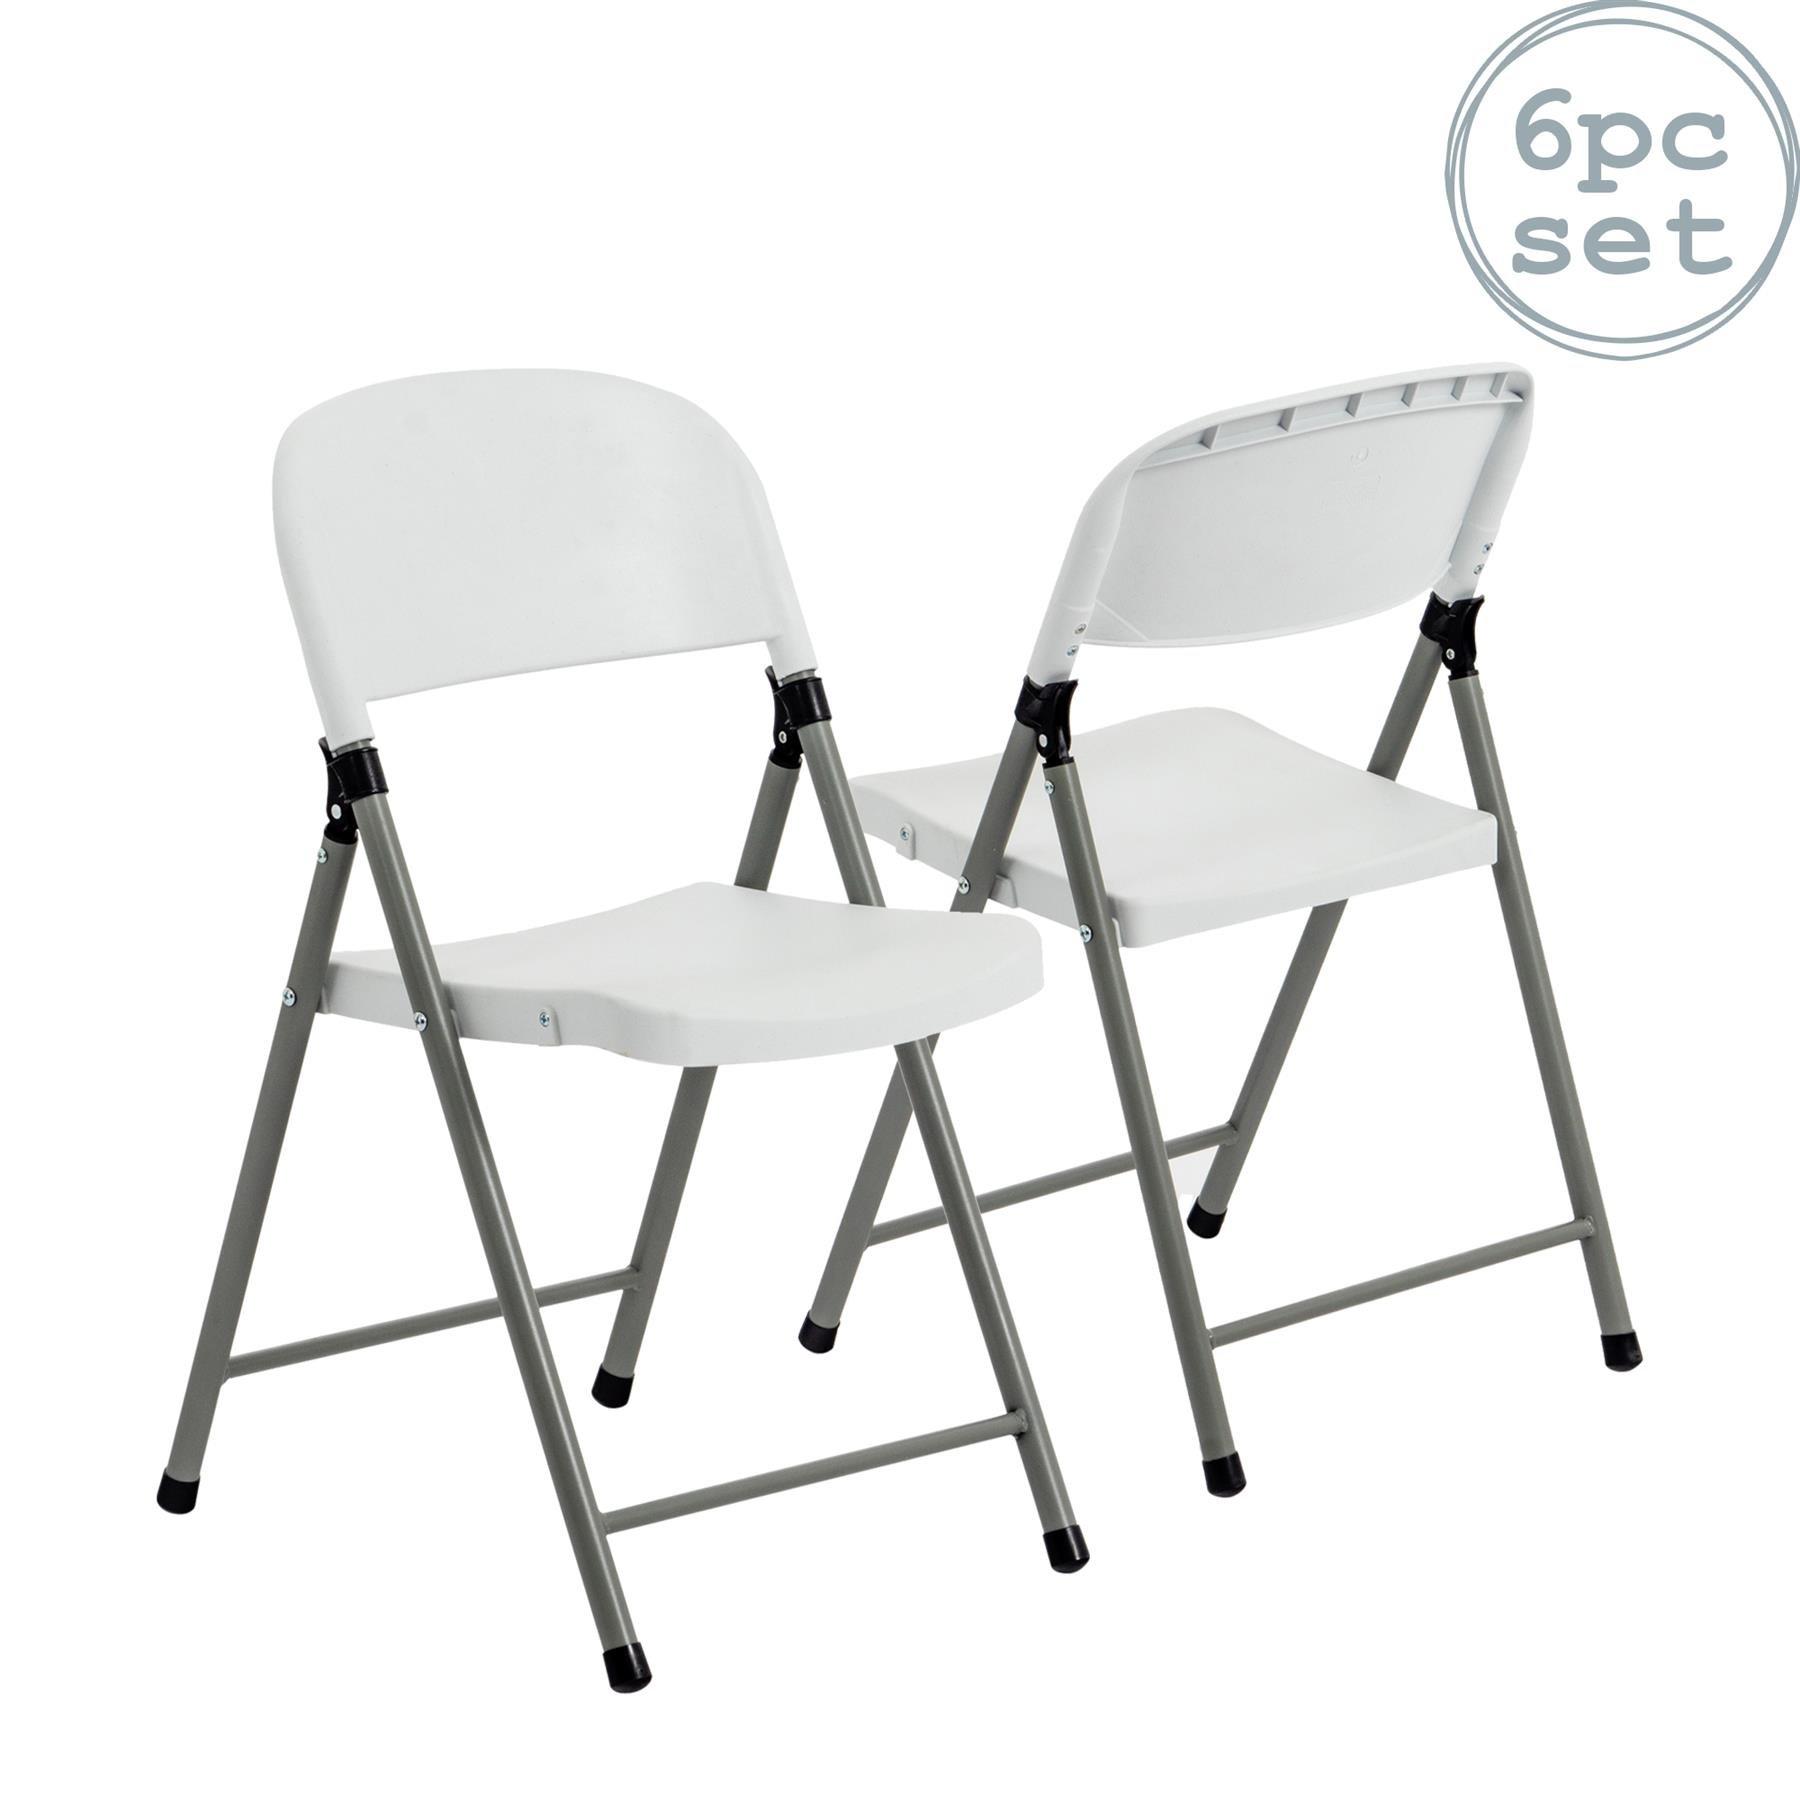 Folding Trestle Chairs White Pack of 6